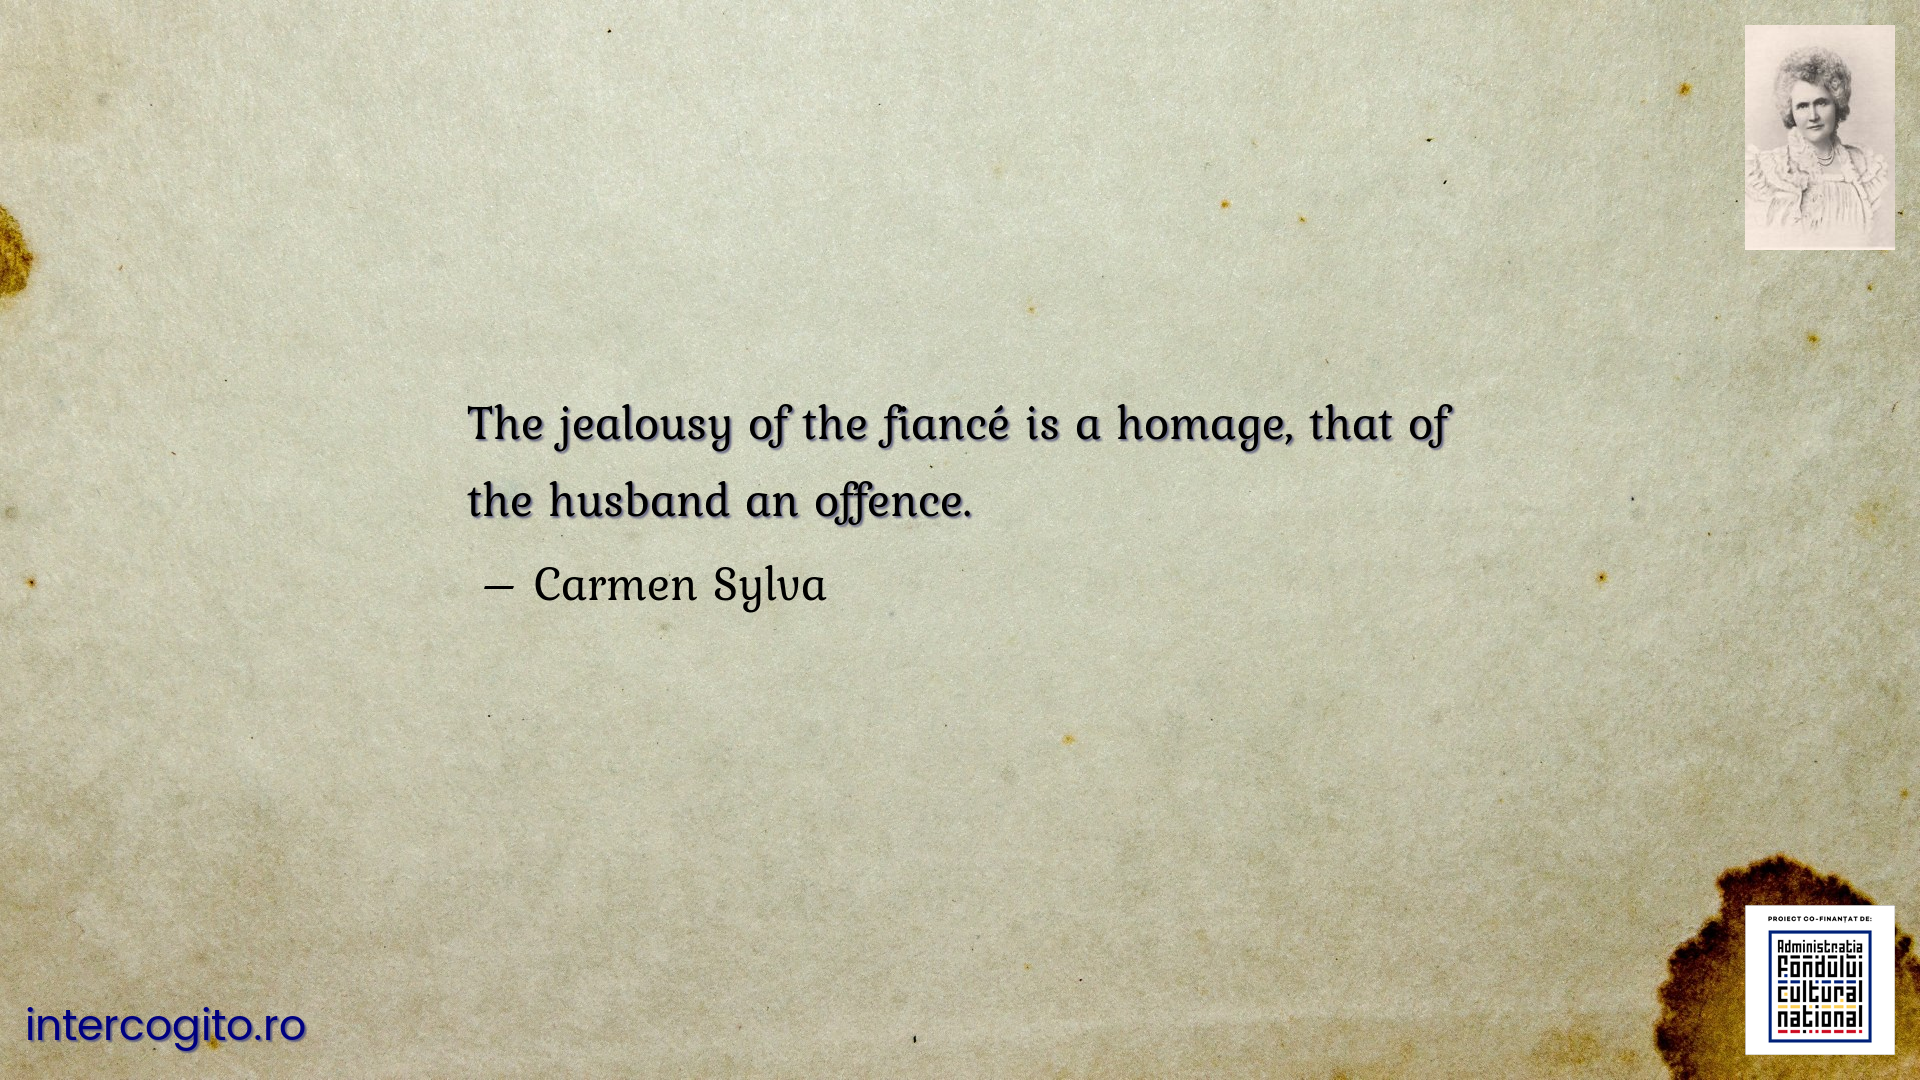 The jealousy of the fiancé is a homage, that of the husband an offence.